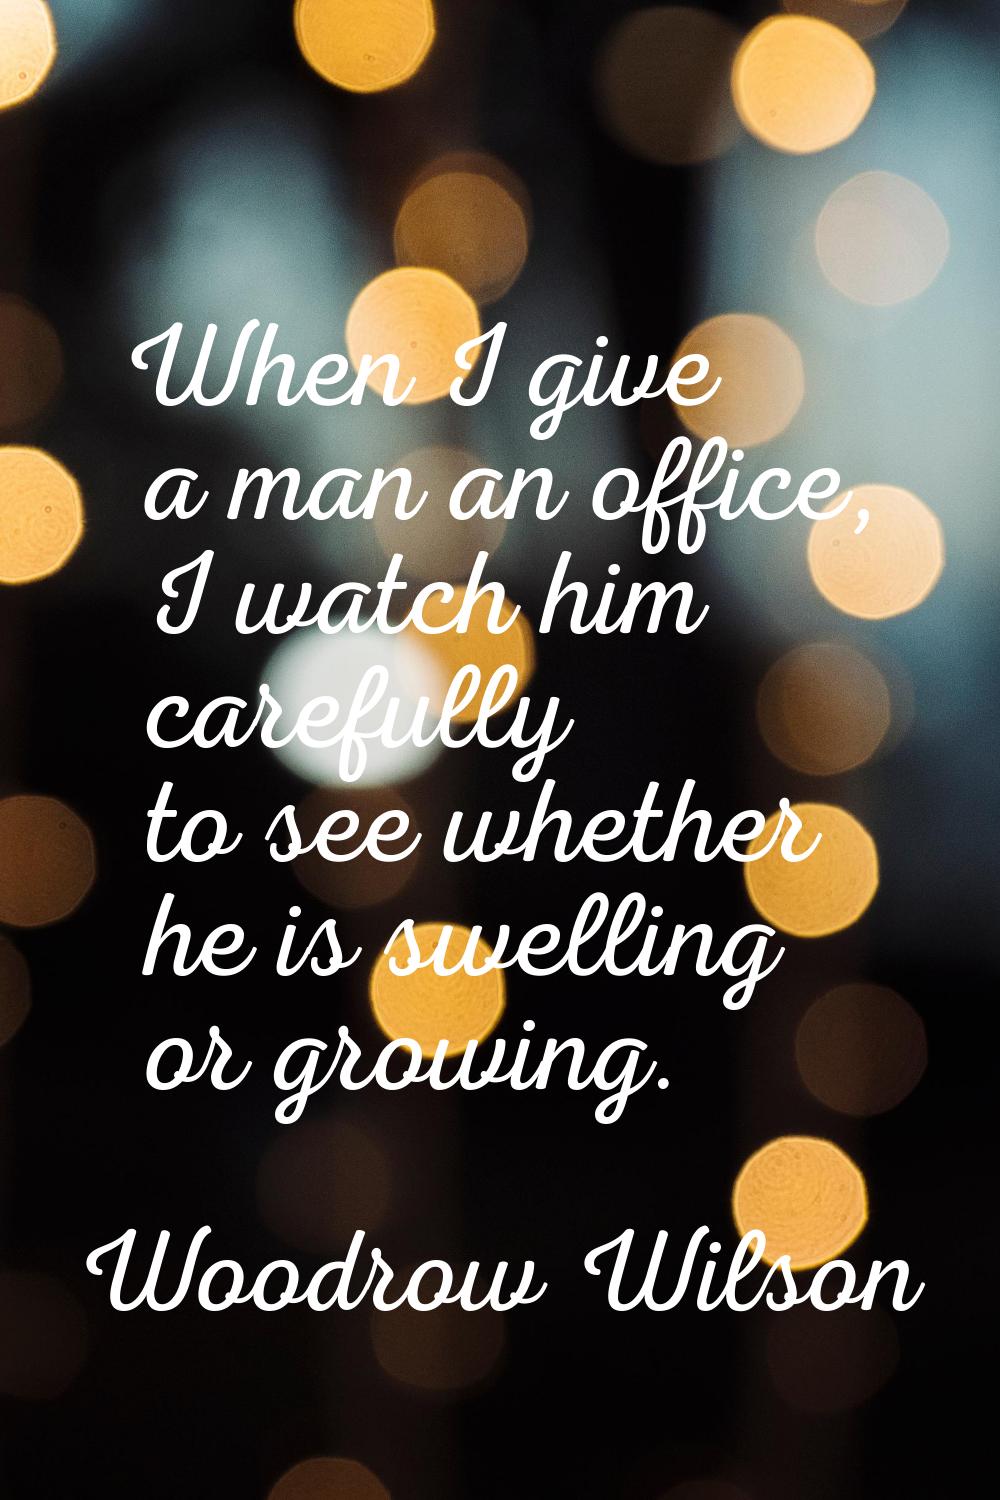 When I give a man an office, I watch him carefully to see whether he is swelling or growing.